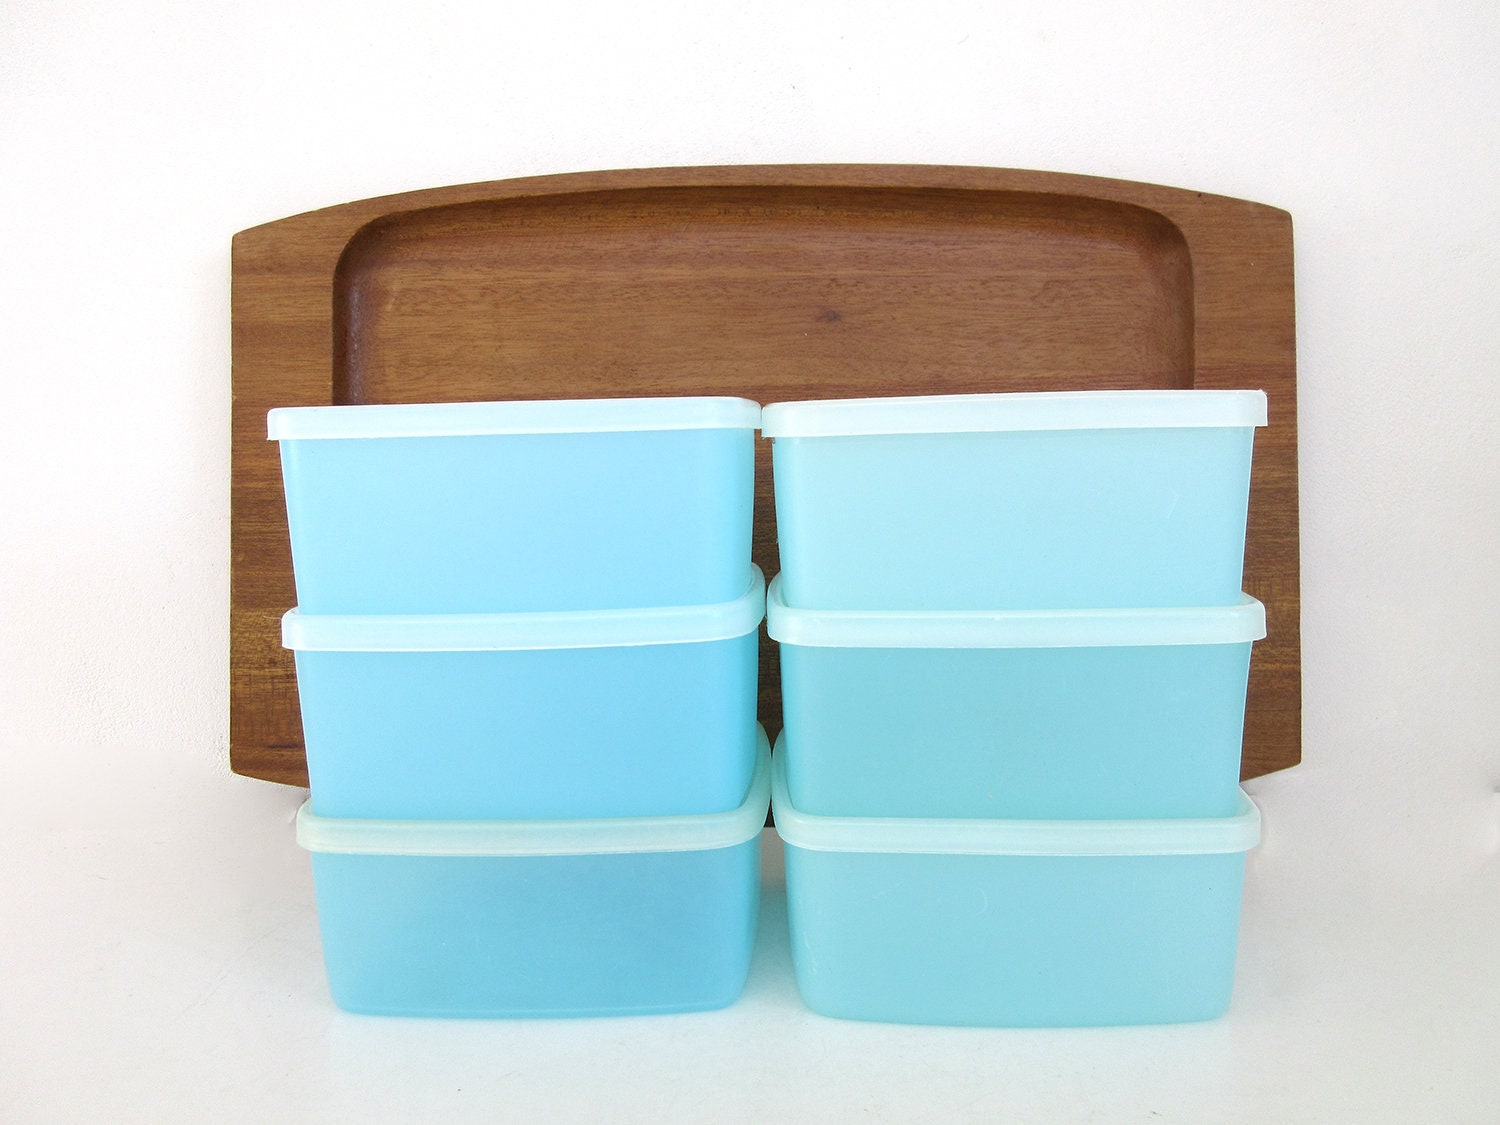 SALE 💥 Tupperware Square Containers and Mini Square Containers 10-pc